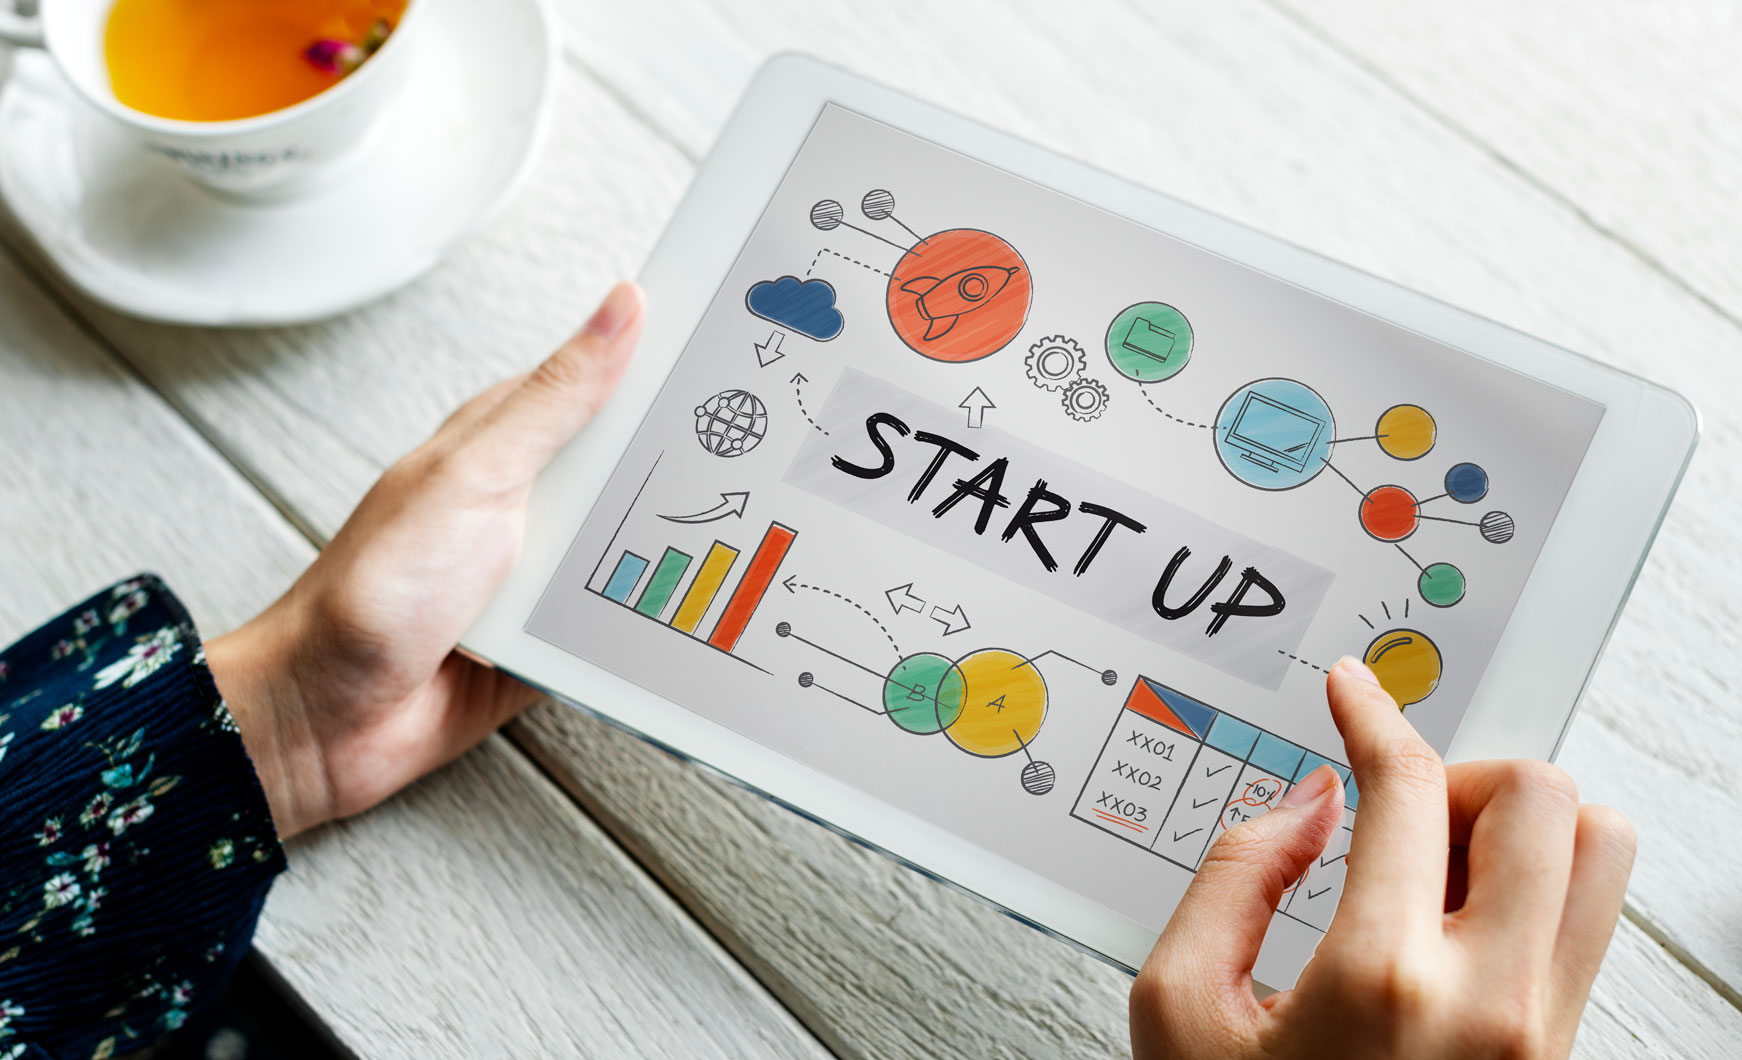 budget-2021-is-a-sigh-of-relief-for-startup-ecosystem